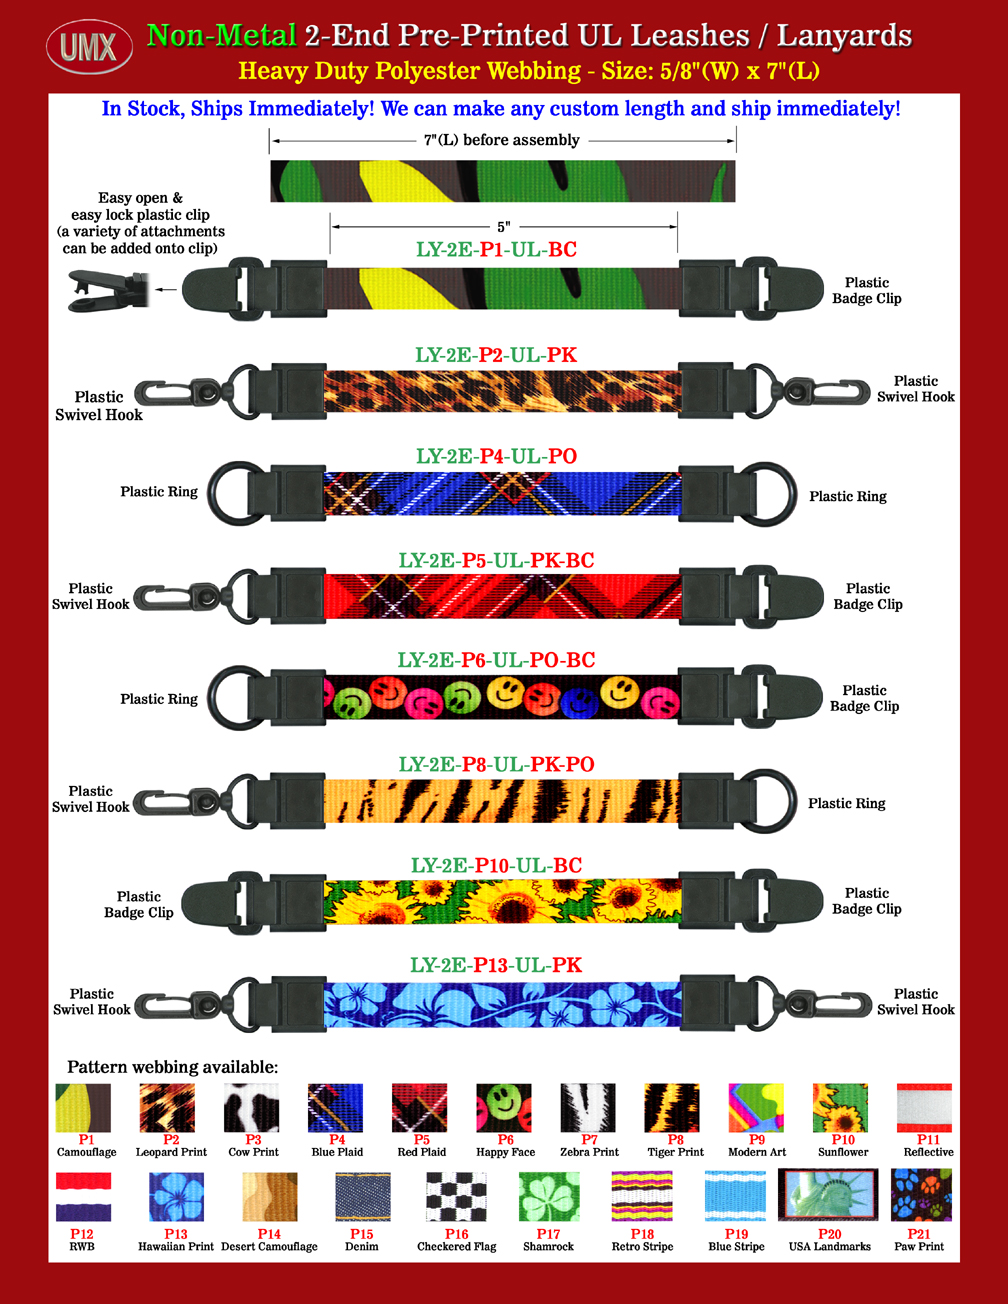 5/8" Pre-Printed Pattern Universal Link All Plastic Attachment 2-End Leashes.